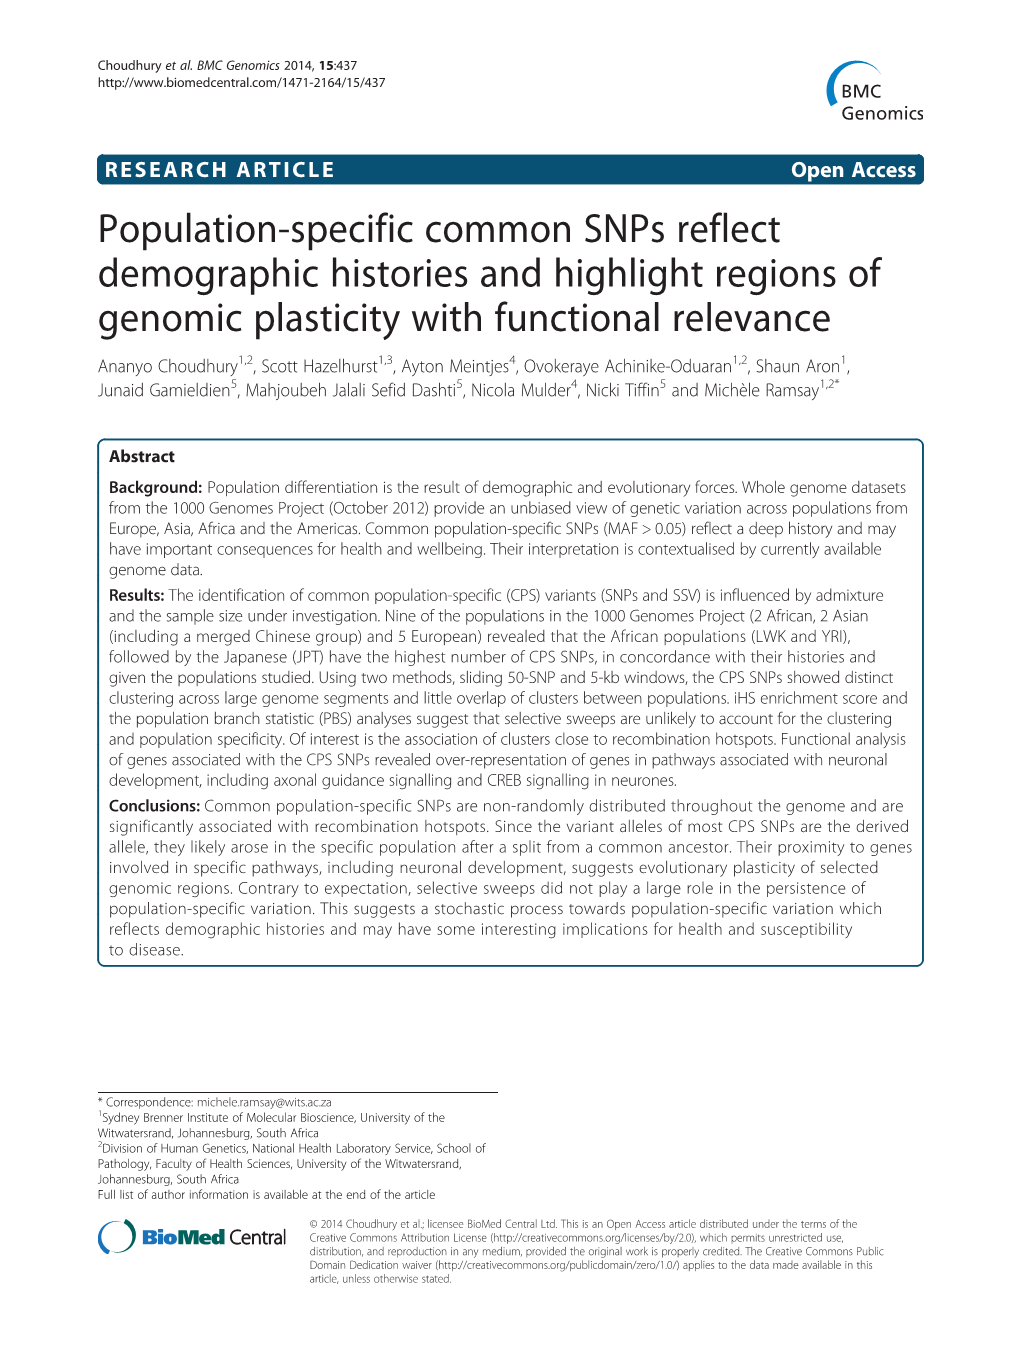 Population-Specific Common Snps Reflect Demographic Histories And